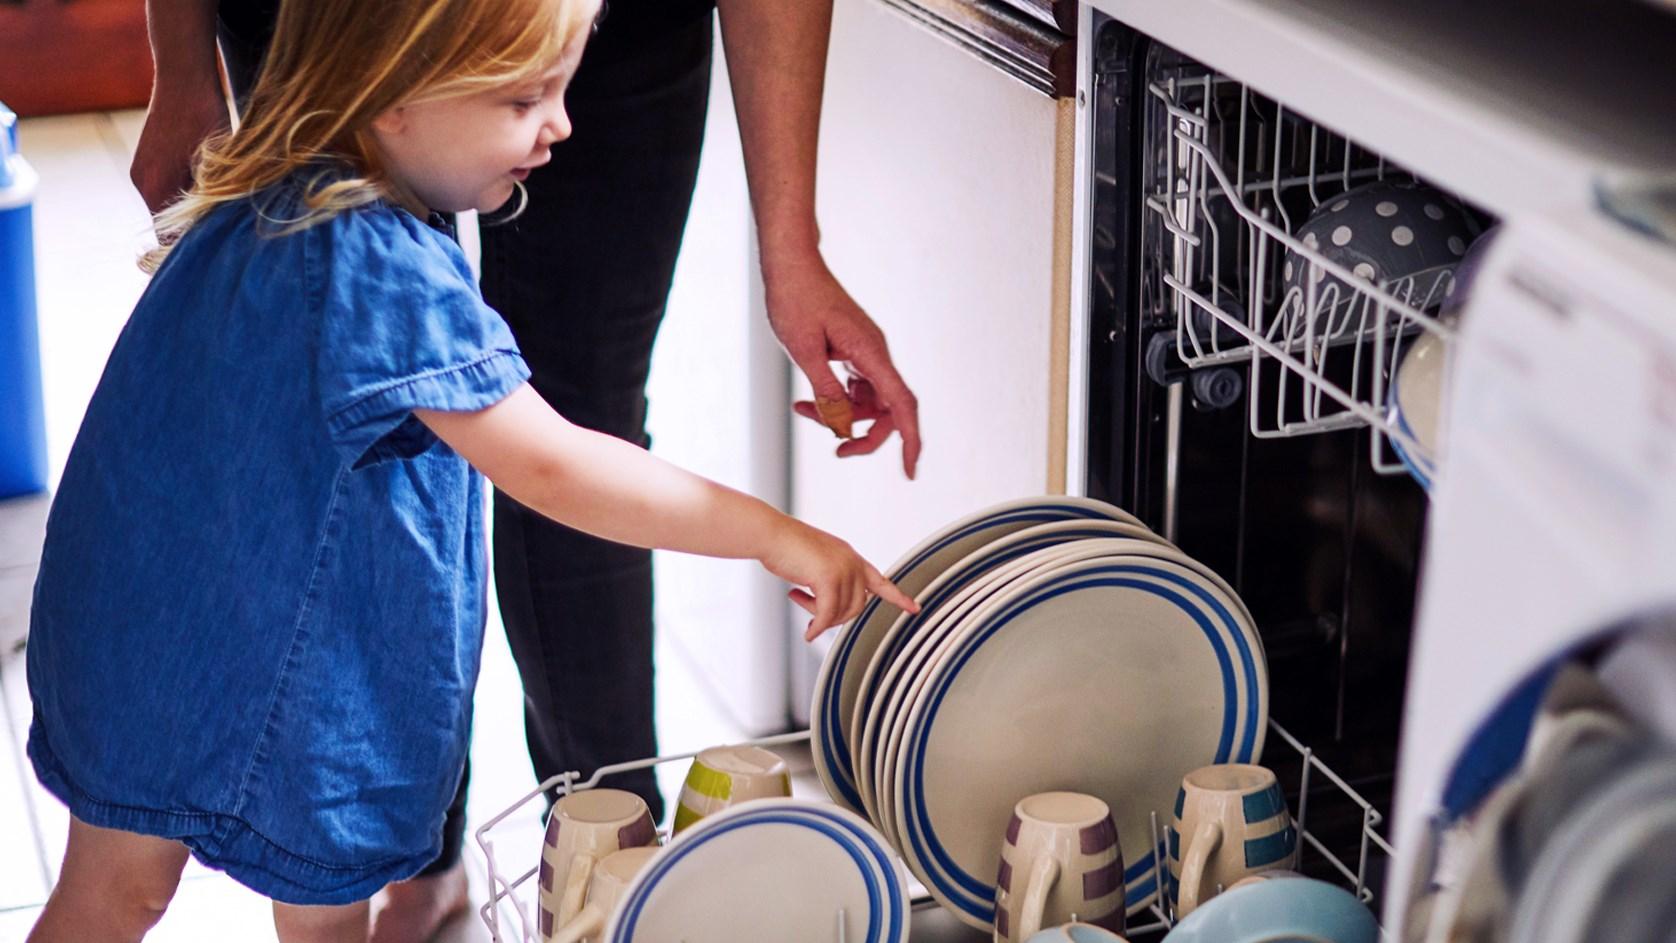 Child helping adult with dishwasher